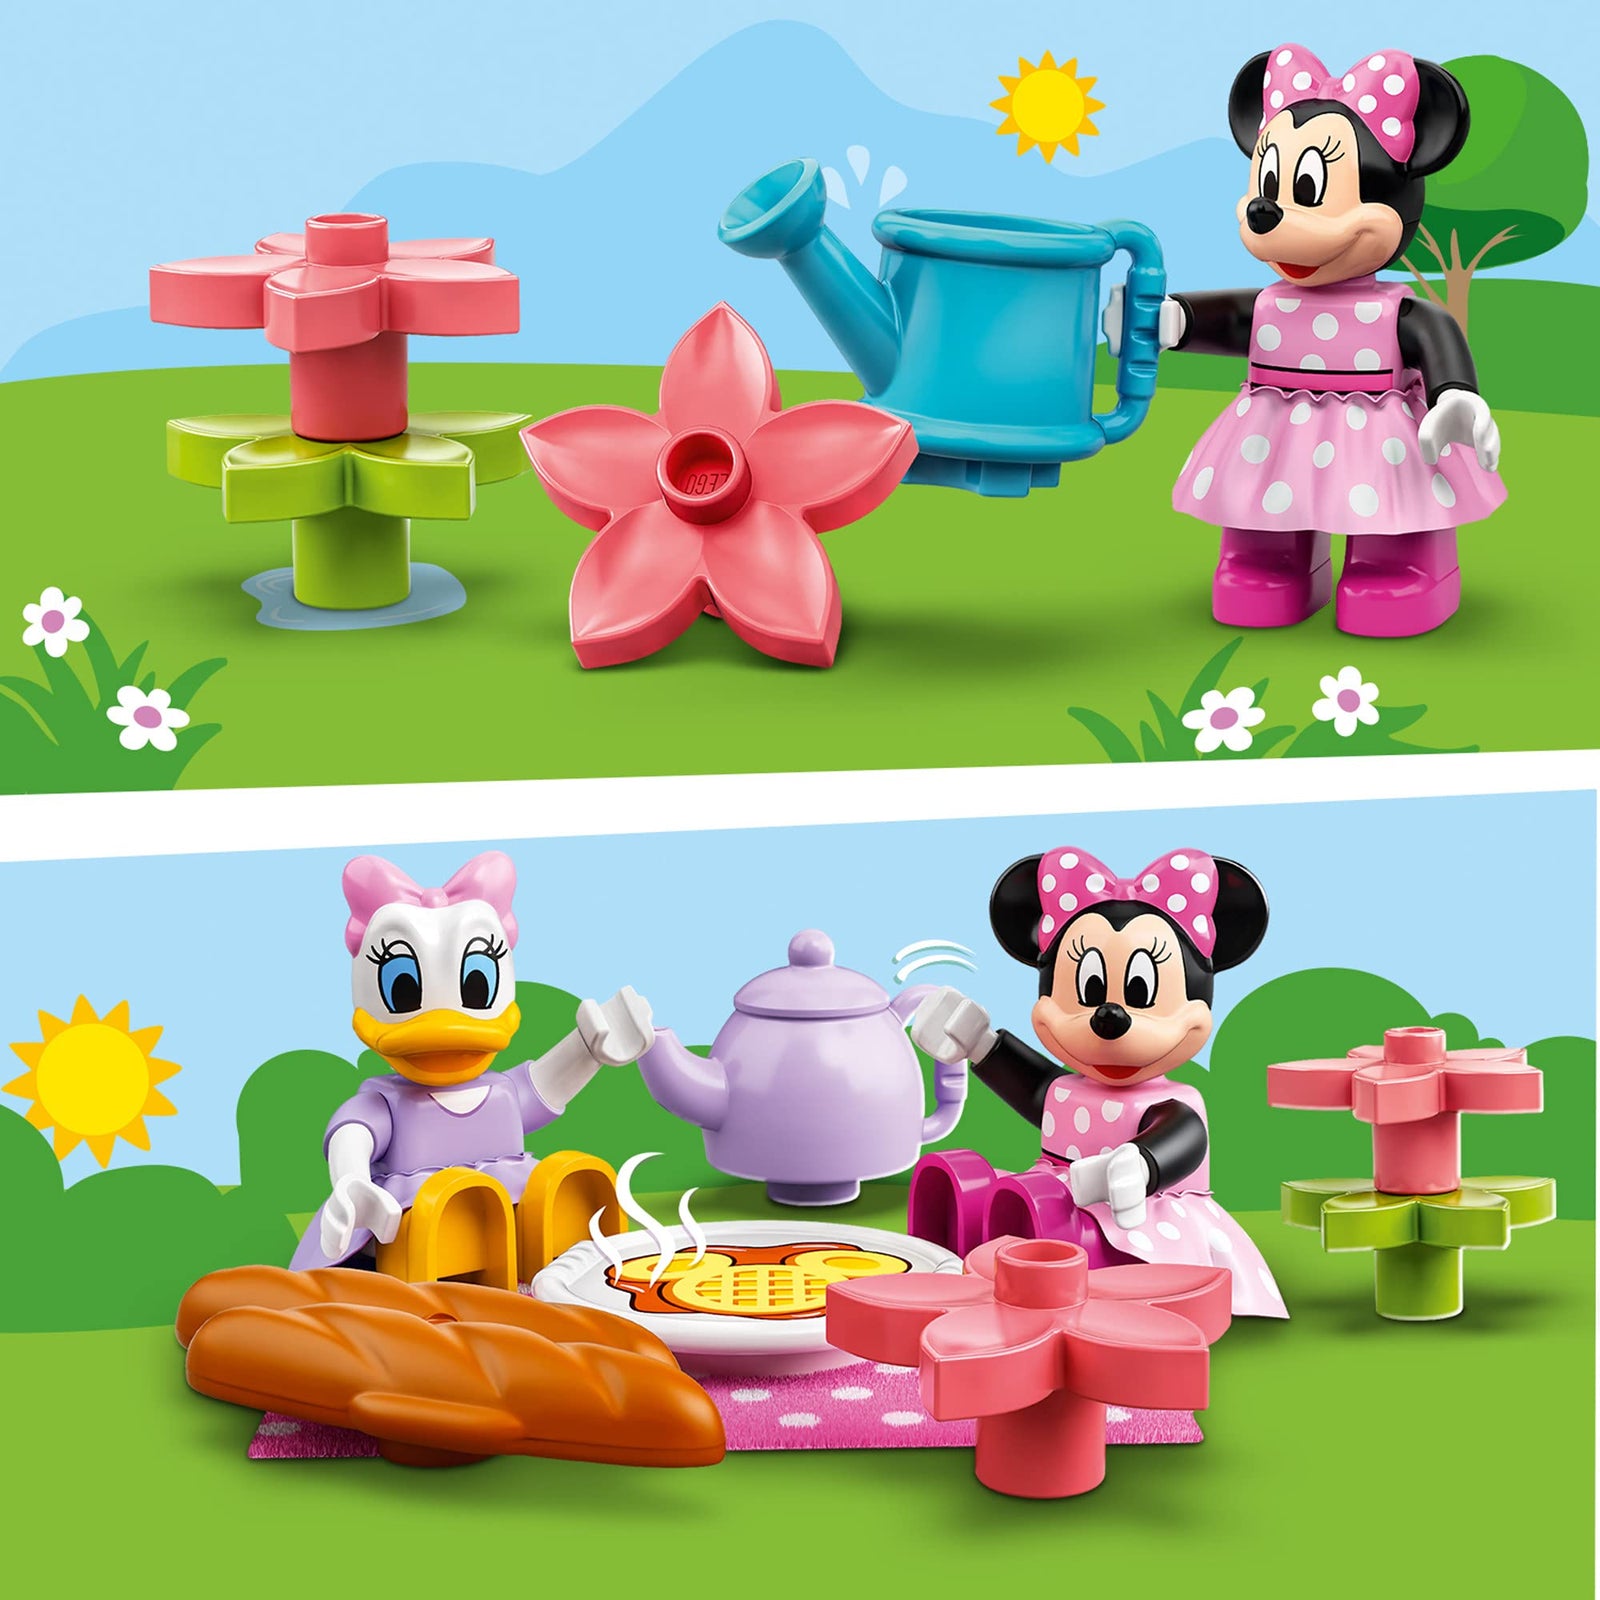 LEGO DUPLO Disney Minnie’s House and Café 10942 Dollhouse Building Toy for Kids with Minnie Mouse and Daisy Duck; New 2021 (91 Pieces)